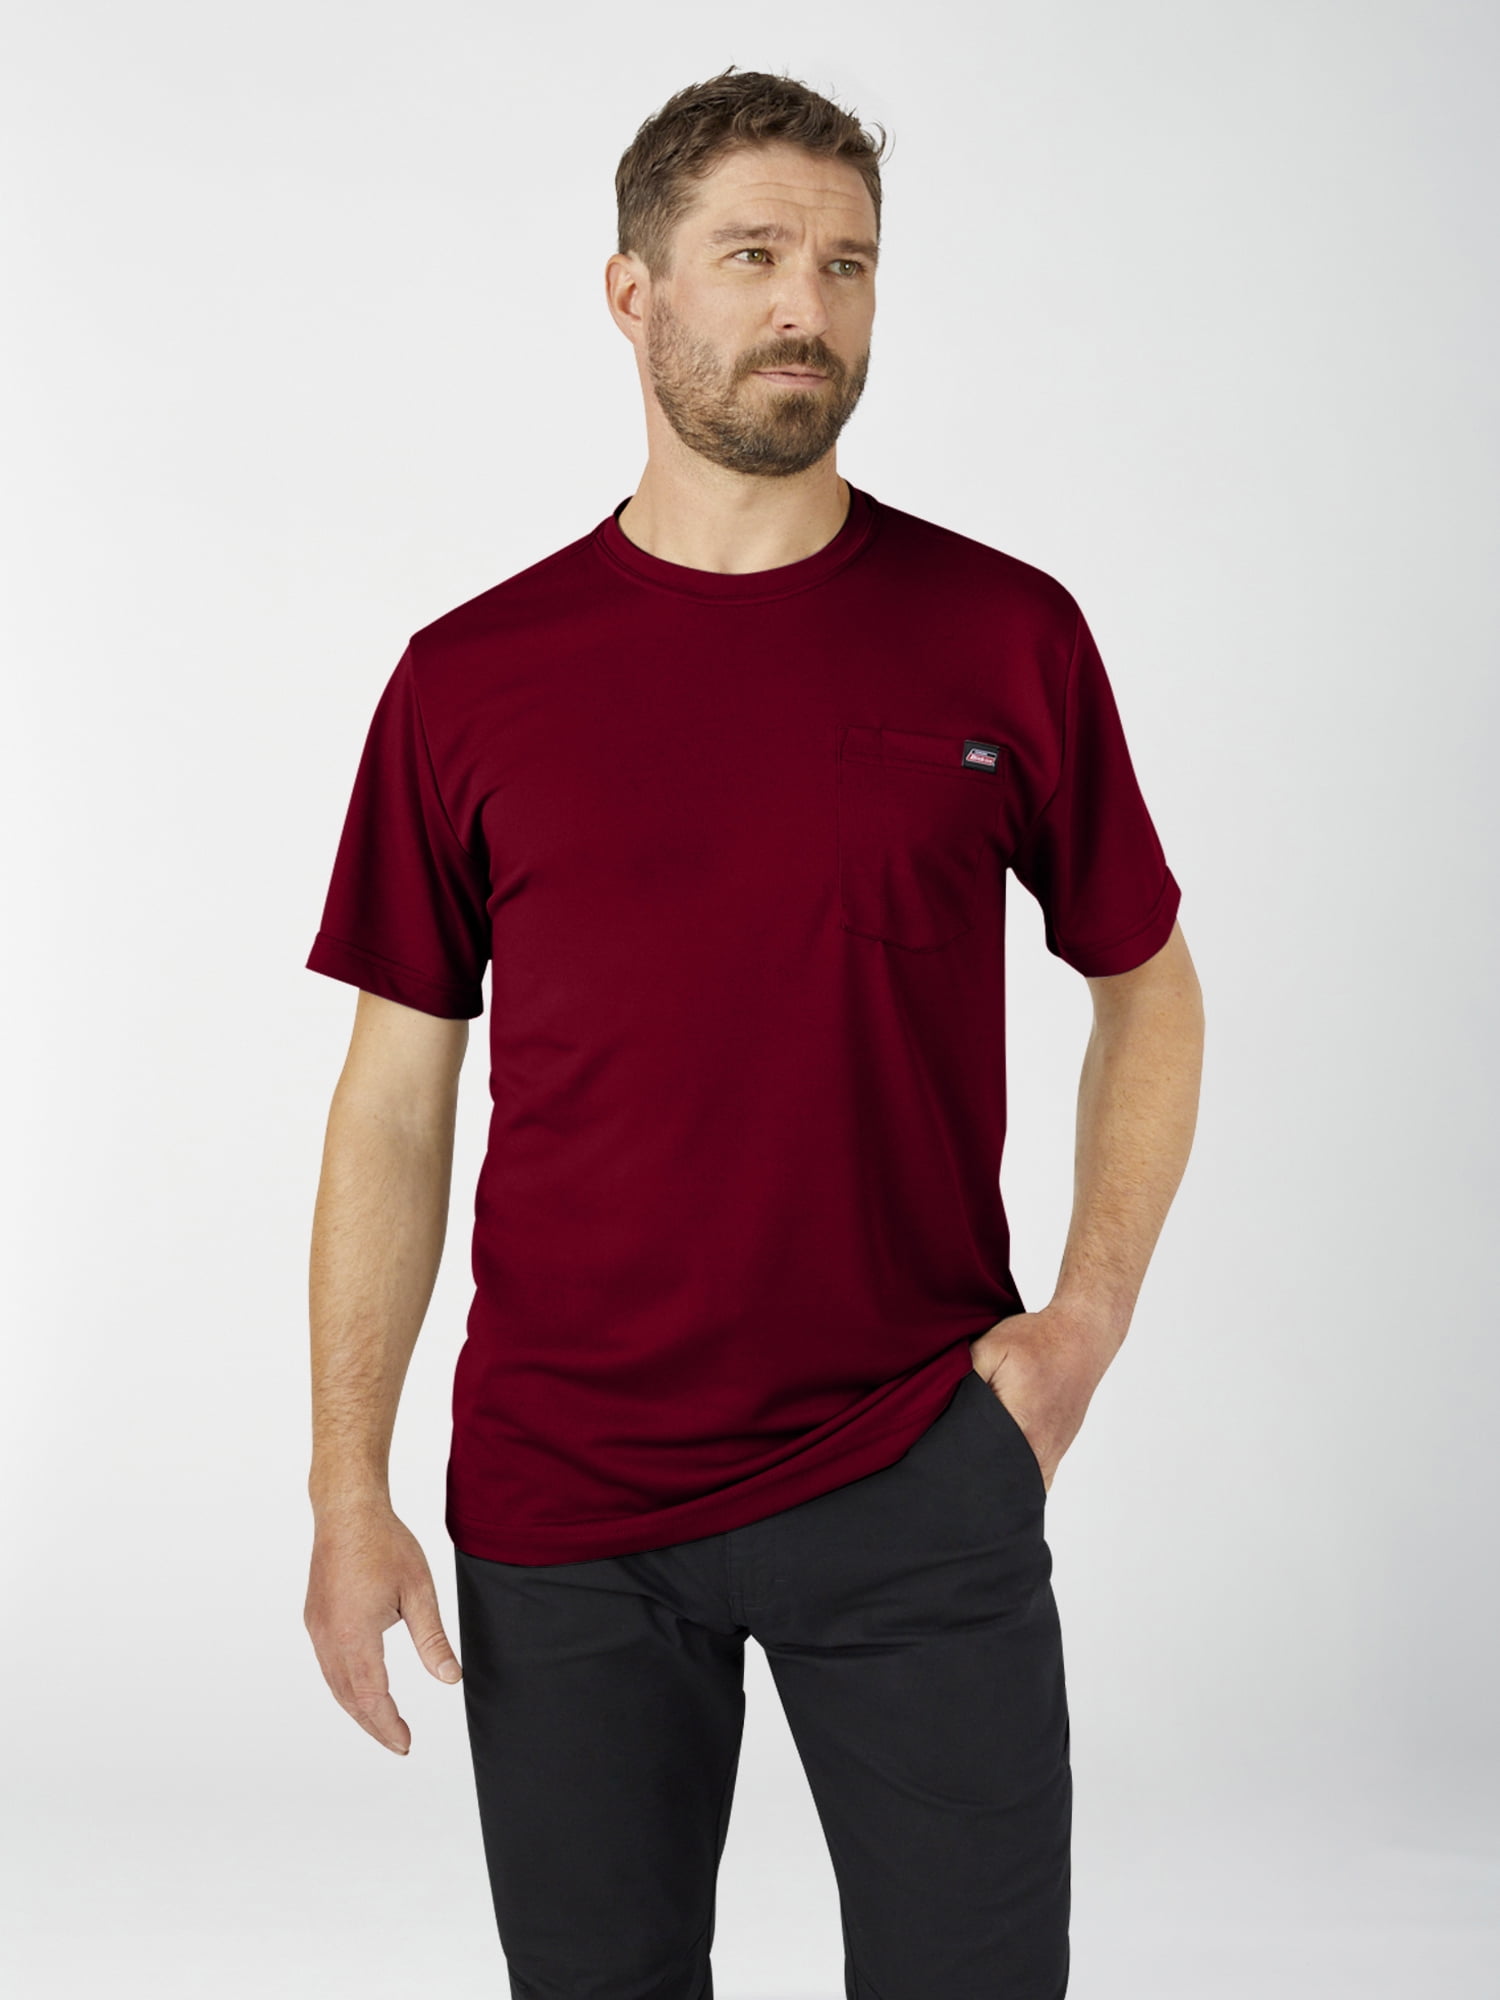 Genuine Dickies Men s Relaxed Fit Performance Polyester Tee Shirt